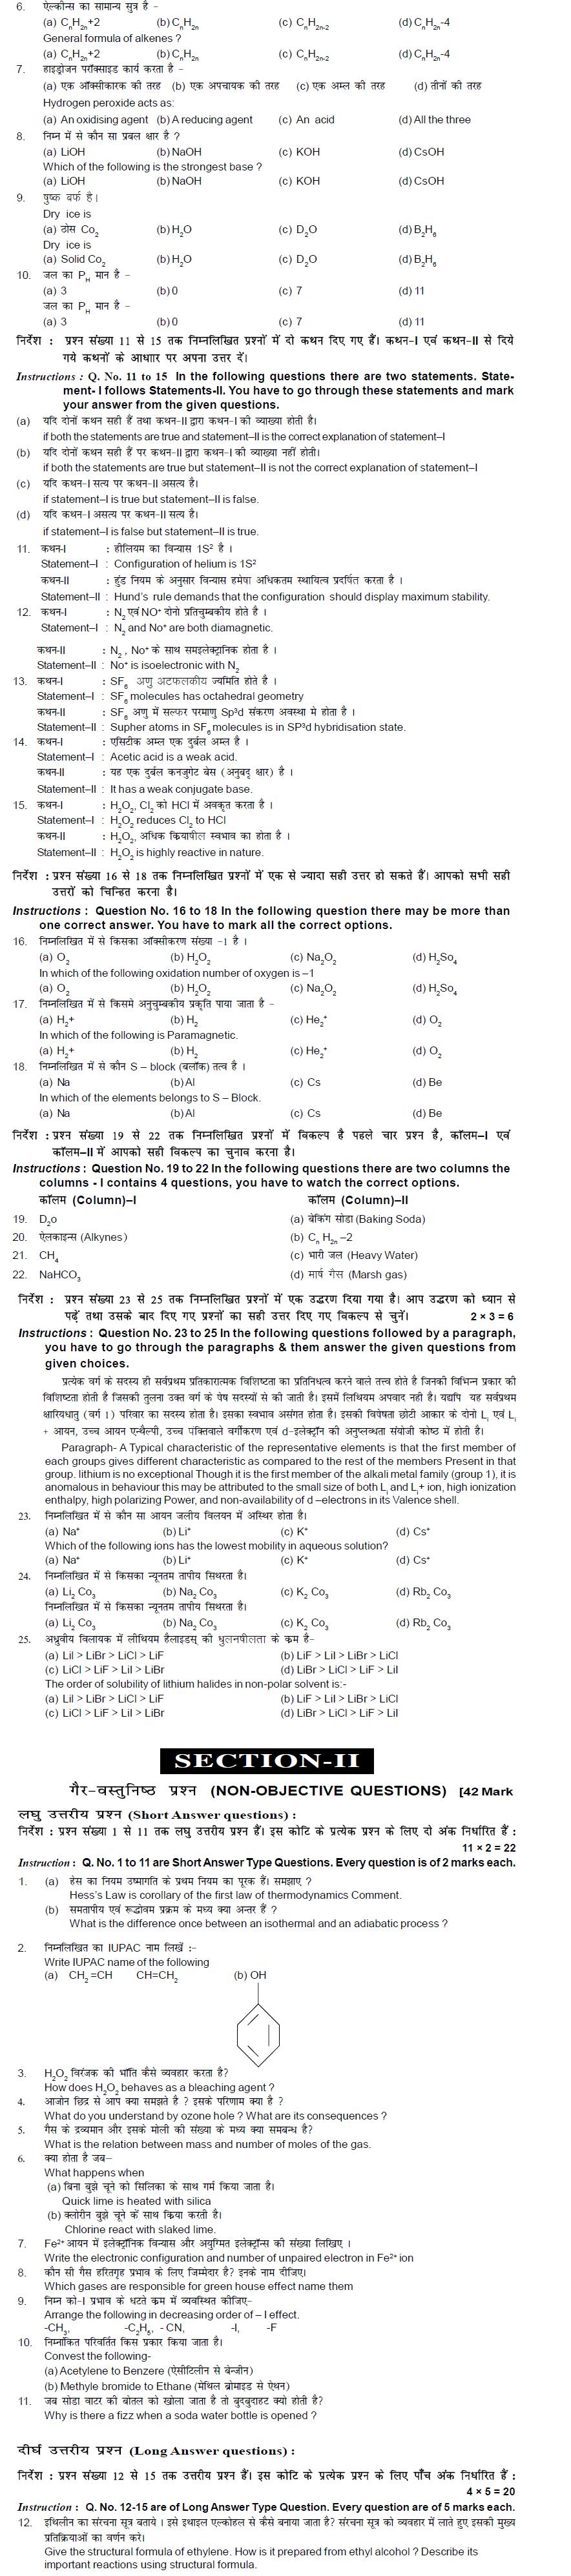 Bihar Board Class XI Science Model Question Papers - Chemistry